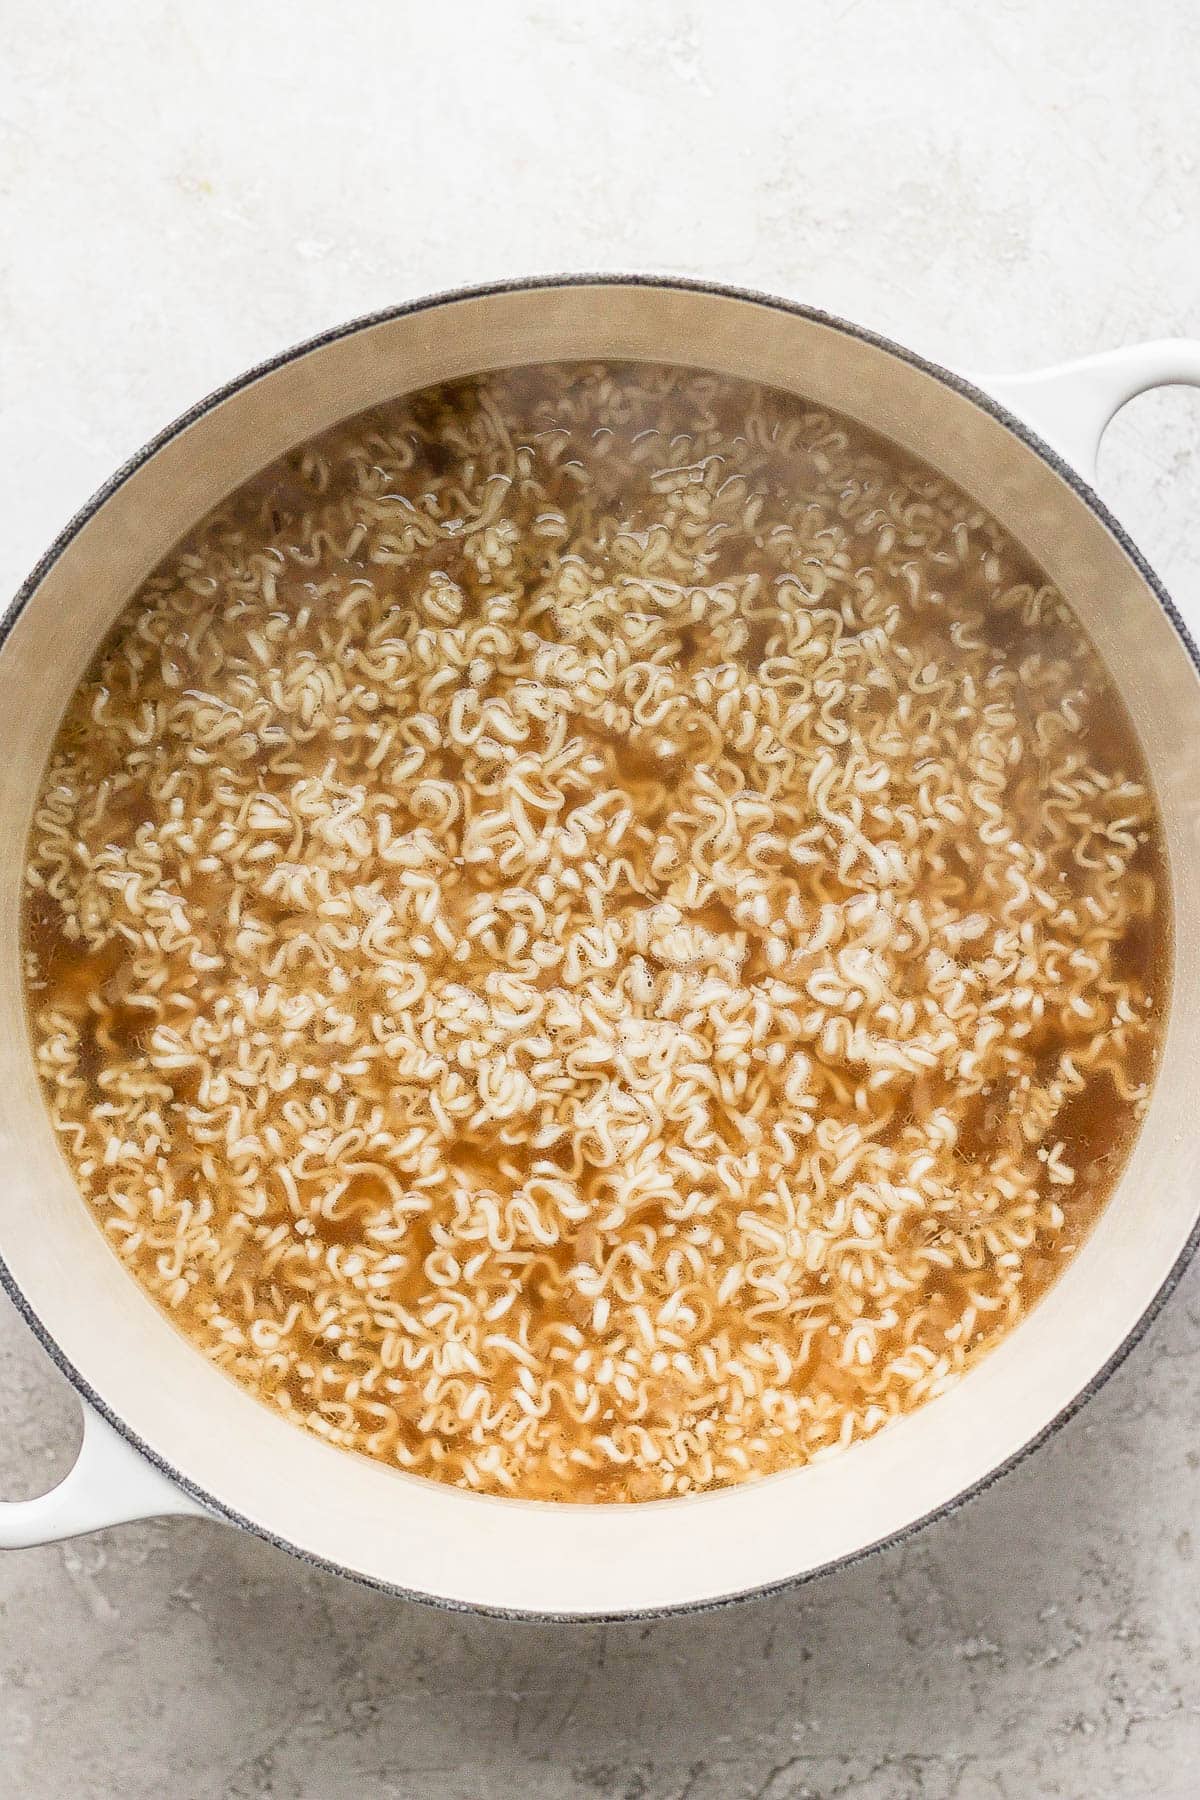 Ramen noodles now added to the dutch oven with broth for pork belly ramen.